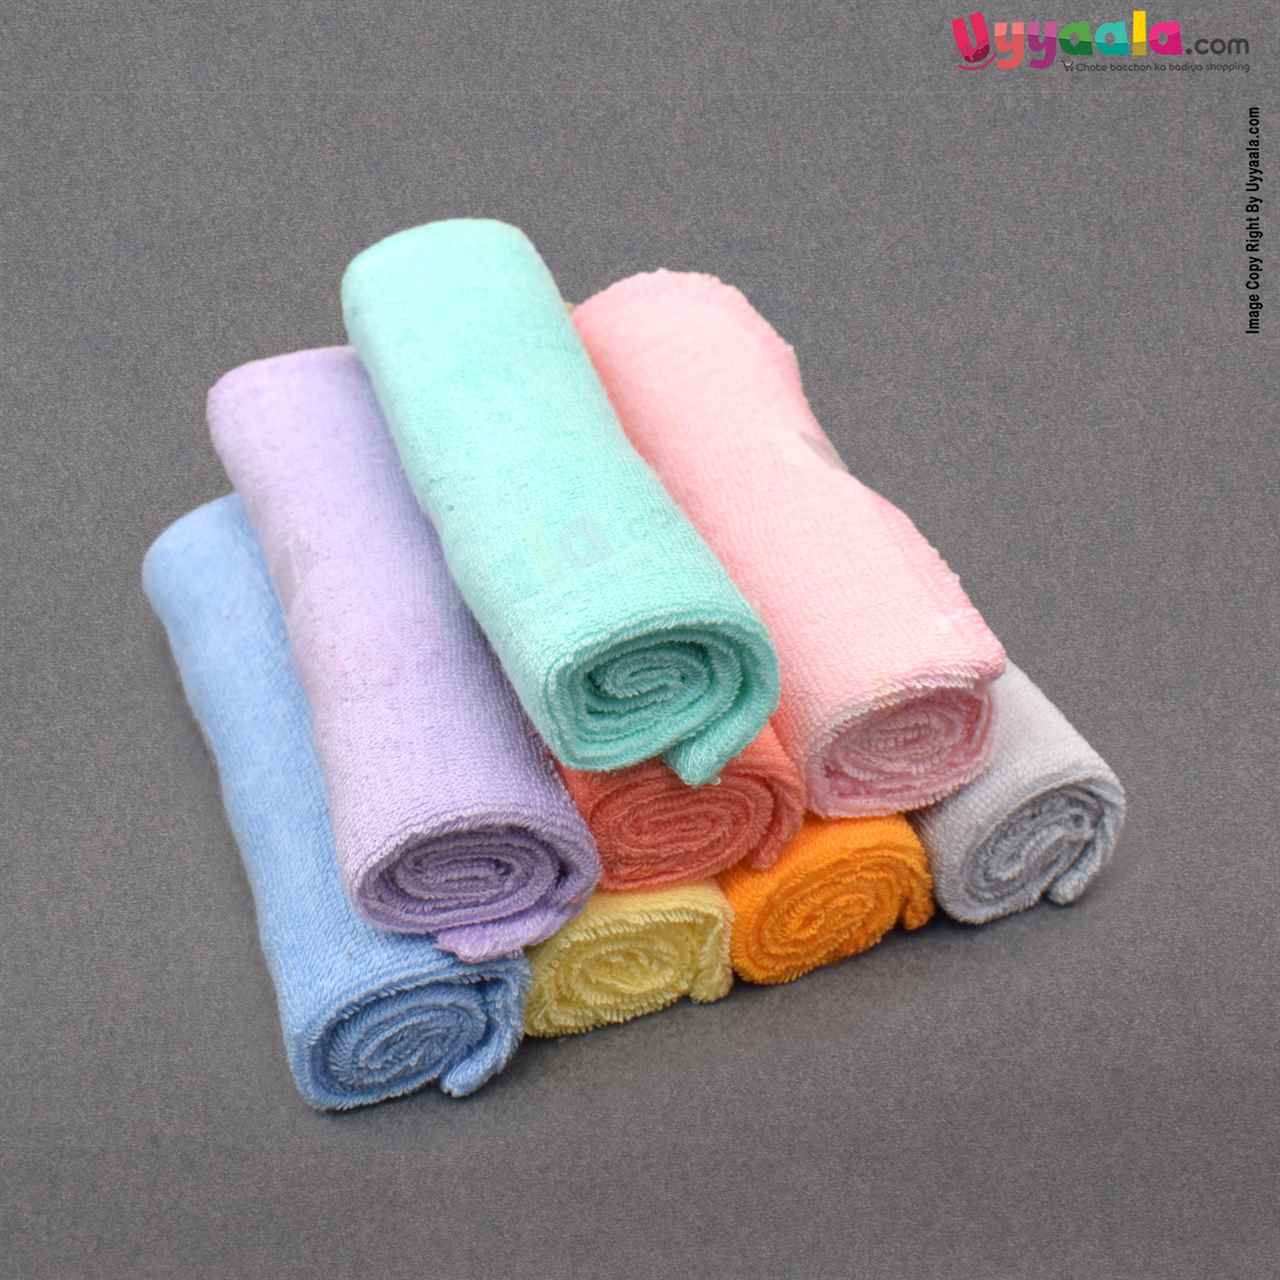 HOPOP Soft & Absorbent Baby Napkins With Premium Quality Cotton Material - Multicolor 0-24m, pack of 8